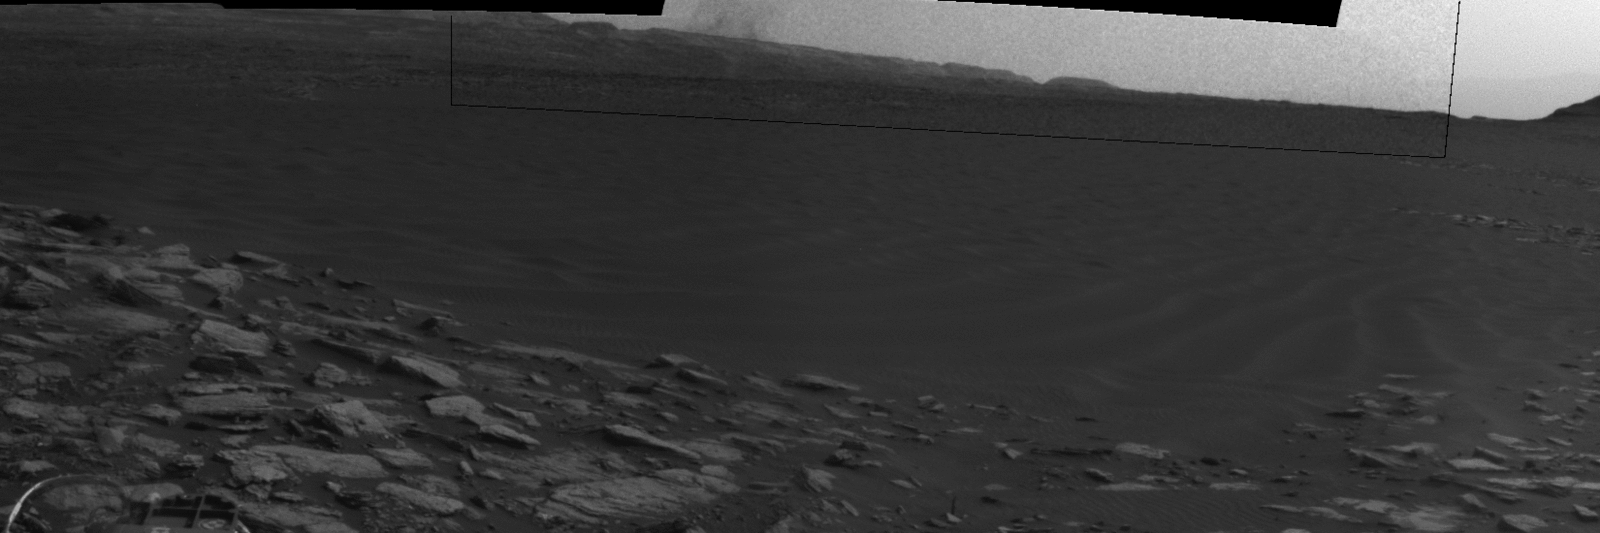 Beyond a dark sand dune closer to the rover, a Martian dust devil passes in front of the horizon in this sequence of images from NASA's Curiosity Mars rover. The rover's Navigation Camera made this series of observations on Feb. 4, 2017, during the local afternoon in Mars' Gale Crater.